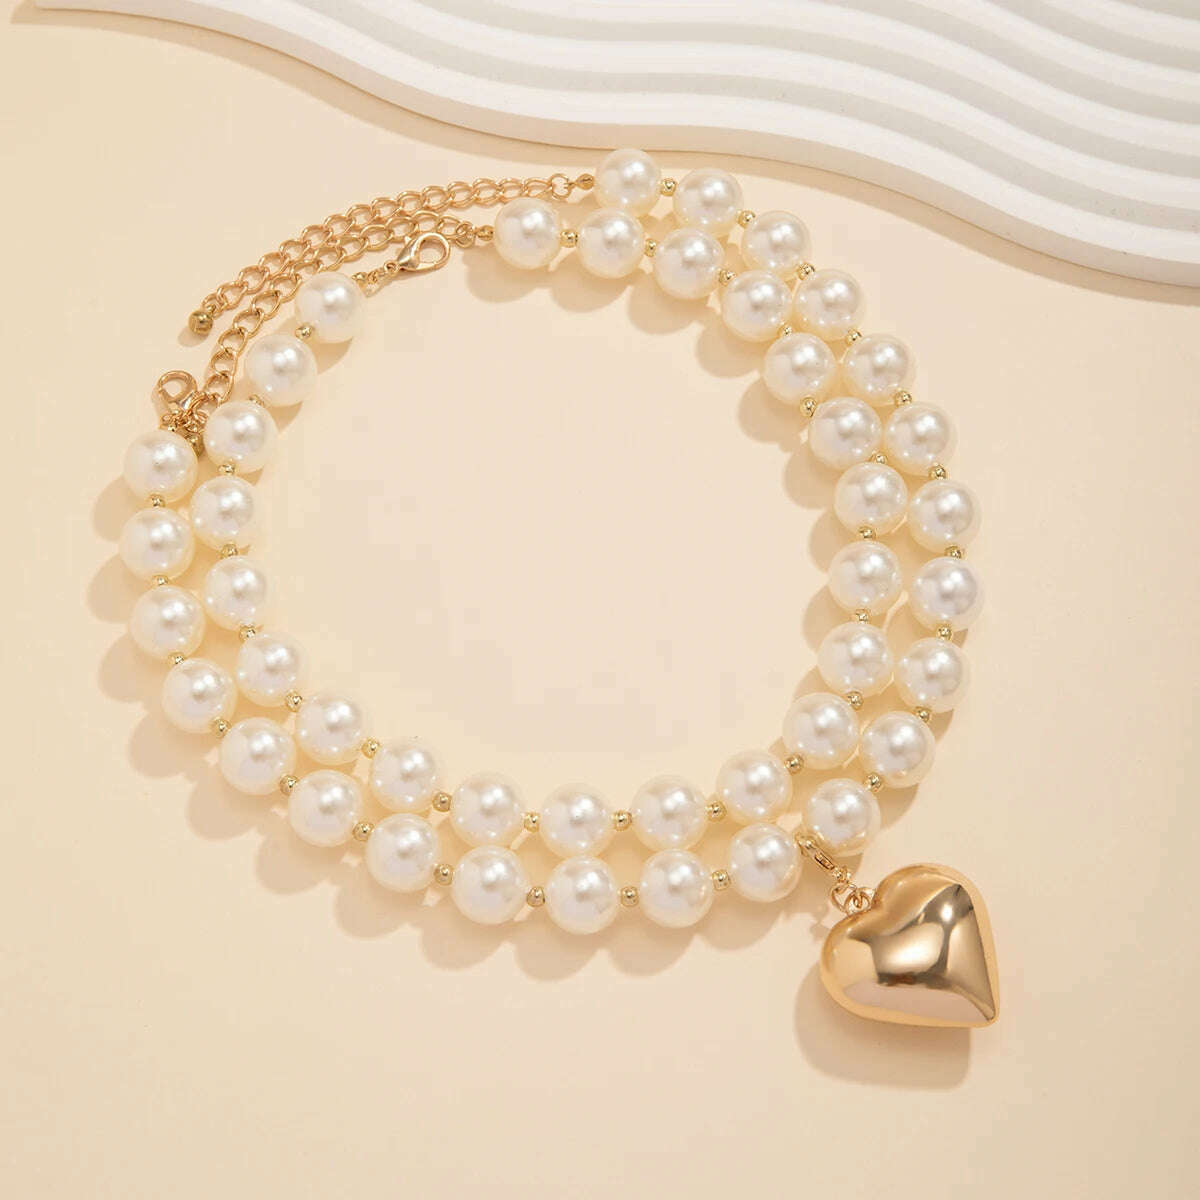 KIMLUD, Lacteo Exaggerated Imitation Pearl Beads Necklace for Women CCB Big Heart Pendant Choker Jewelry On The Neck Collar Party Girls, KIMLUD Women's Clothes